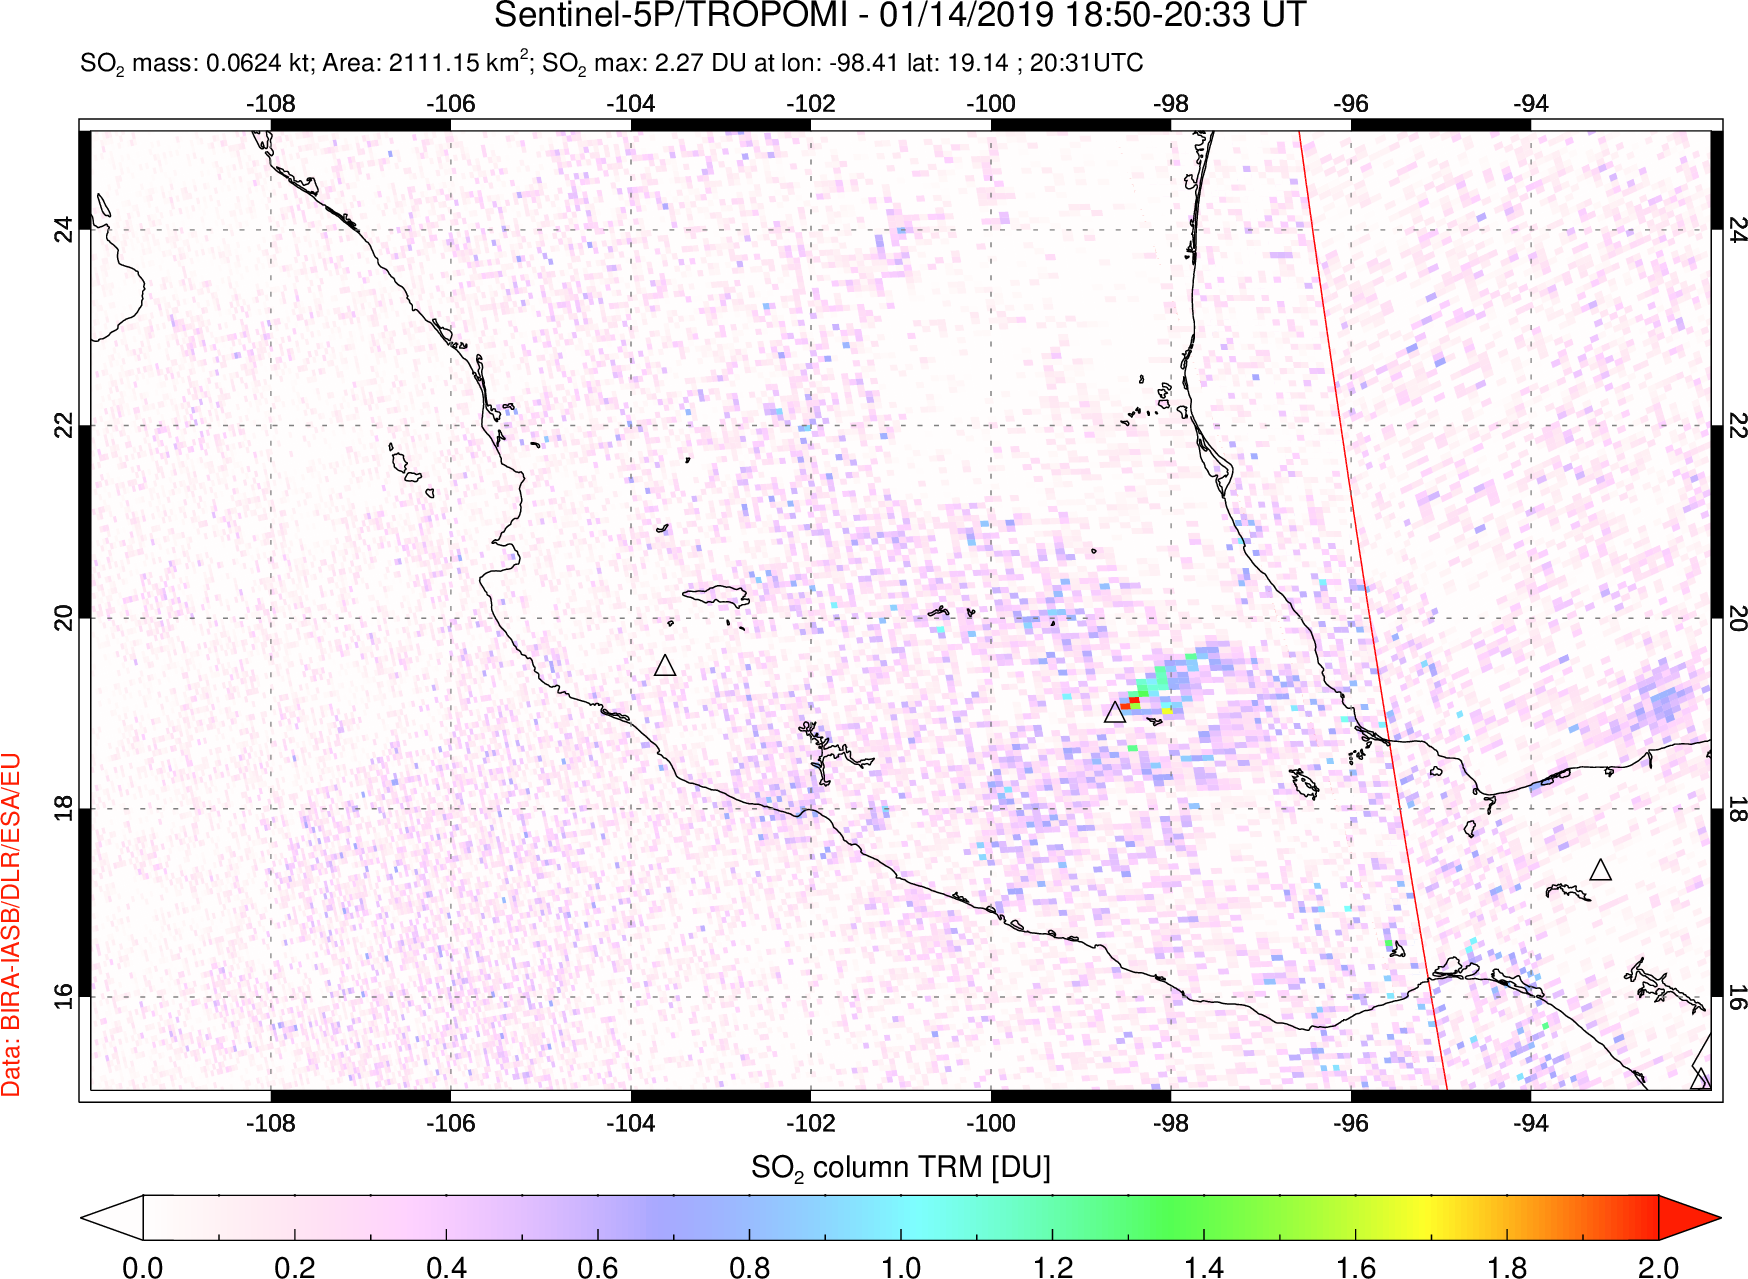 A sulfur dioxide image over Mexico on Jan 14, 2019.